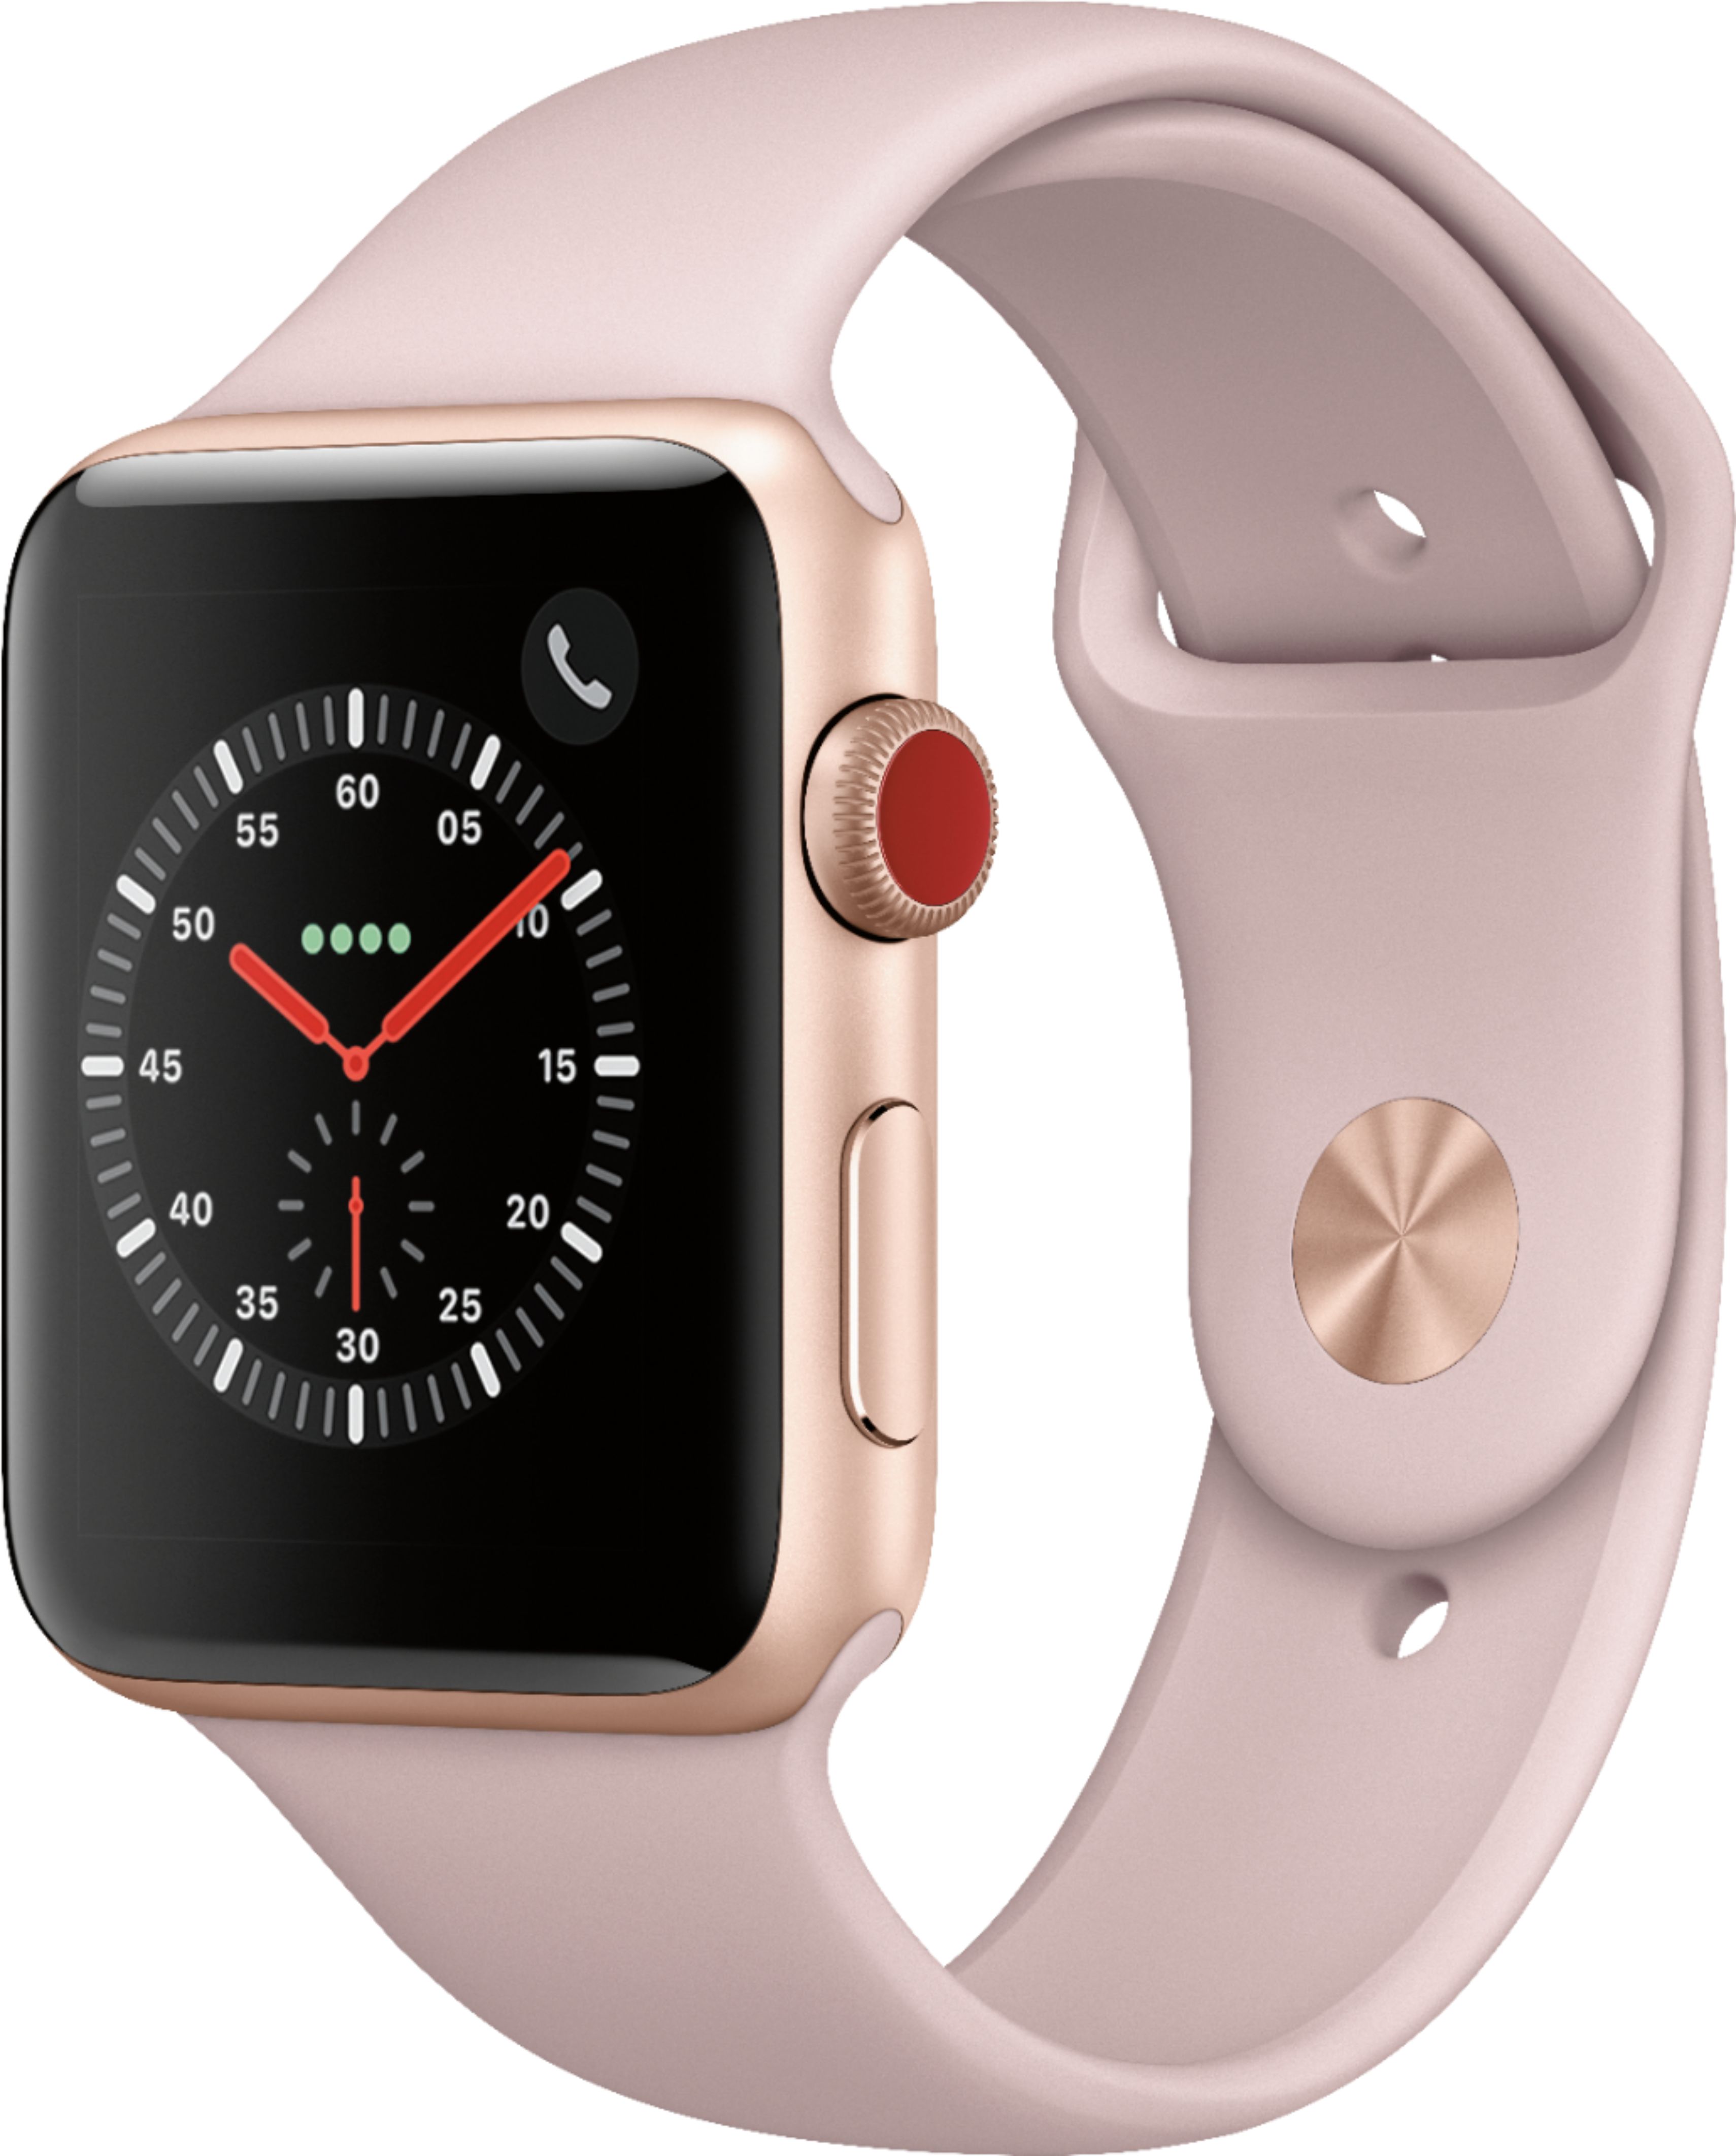 Questions and Answers: Apple Watch Series 3 (GPS + Cellular) 42mm Gold ...